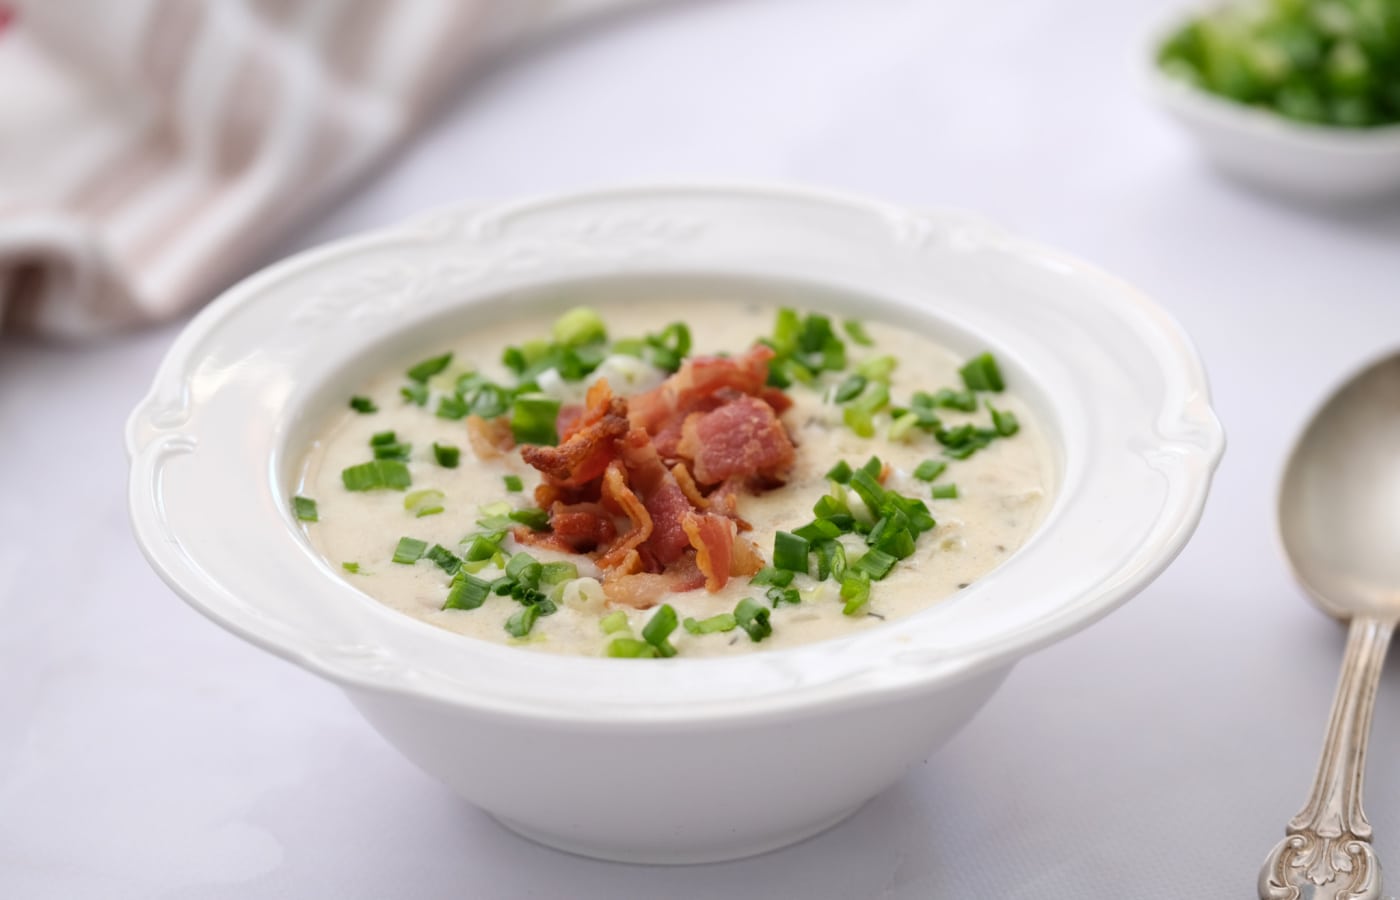 Bar Harbor New England Style Clam Chowder Recipe - Oh, That's Good!